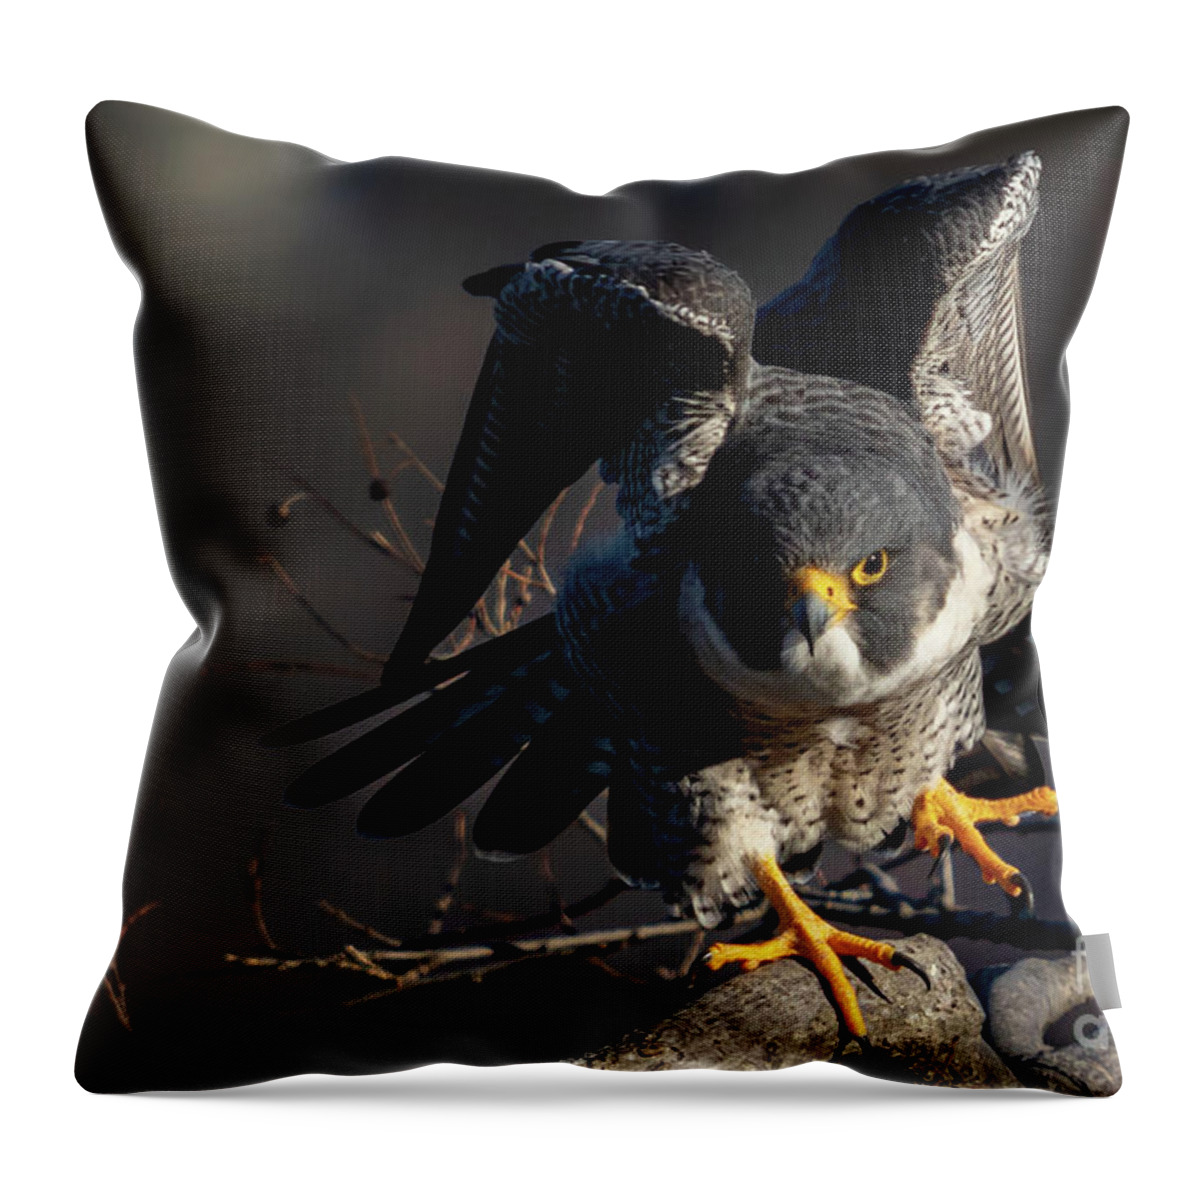 Falcon Throw Pillow featuring the photograph Rise Up by Alyssa Tumale